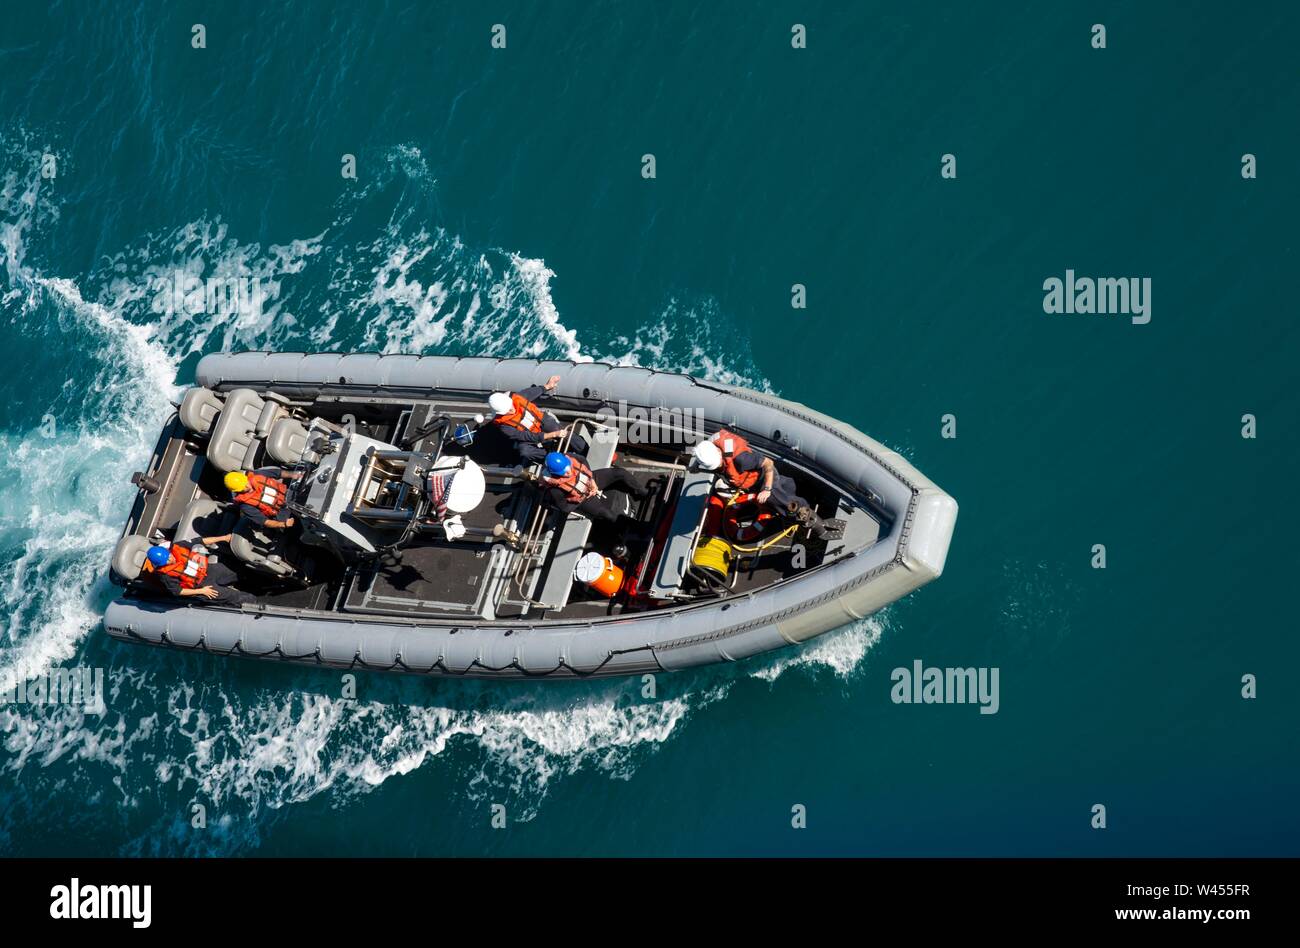 190718-N-DX072-1271 STANAGE BAY, Australia (July 18, 2019) A Rigid-Hull Inflatable Boat (RHIB) approaches the amphibious transport dock ship USS Green Bay (LPD 20) for recovery. Green Bay, part of the Wasp Expeditionary Strike Group, with embarked 31st Marine Expeditionary Unit, is currently participating in Talisman Sabre 2019 off the coast of Northern Australia. A bilateral, biennial event, Talisman Sabre is designed to improve U.S. and Australian combat training, readiness and interoperability through realistic, relevant training necessary to maintain regional security, peace and stability. Stock Photo